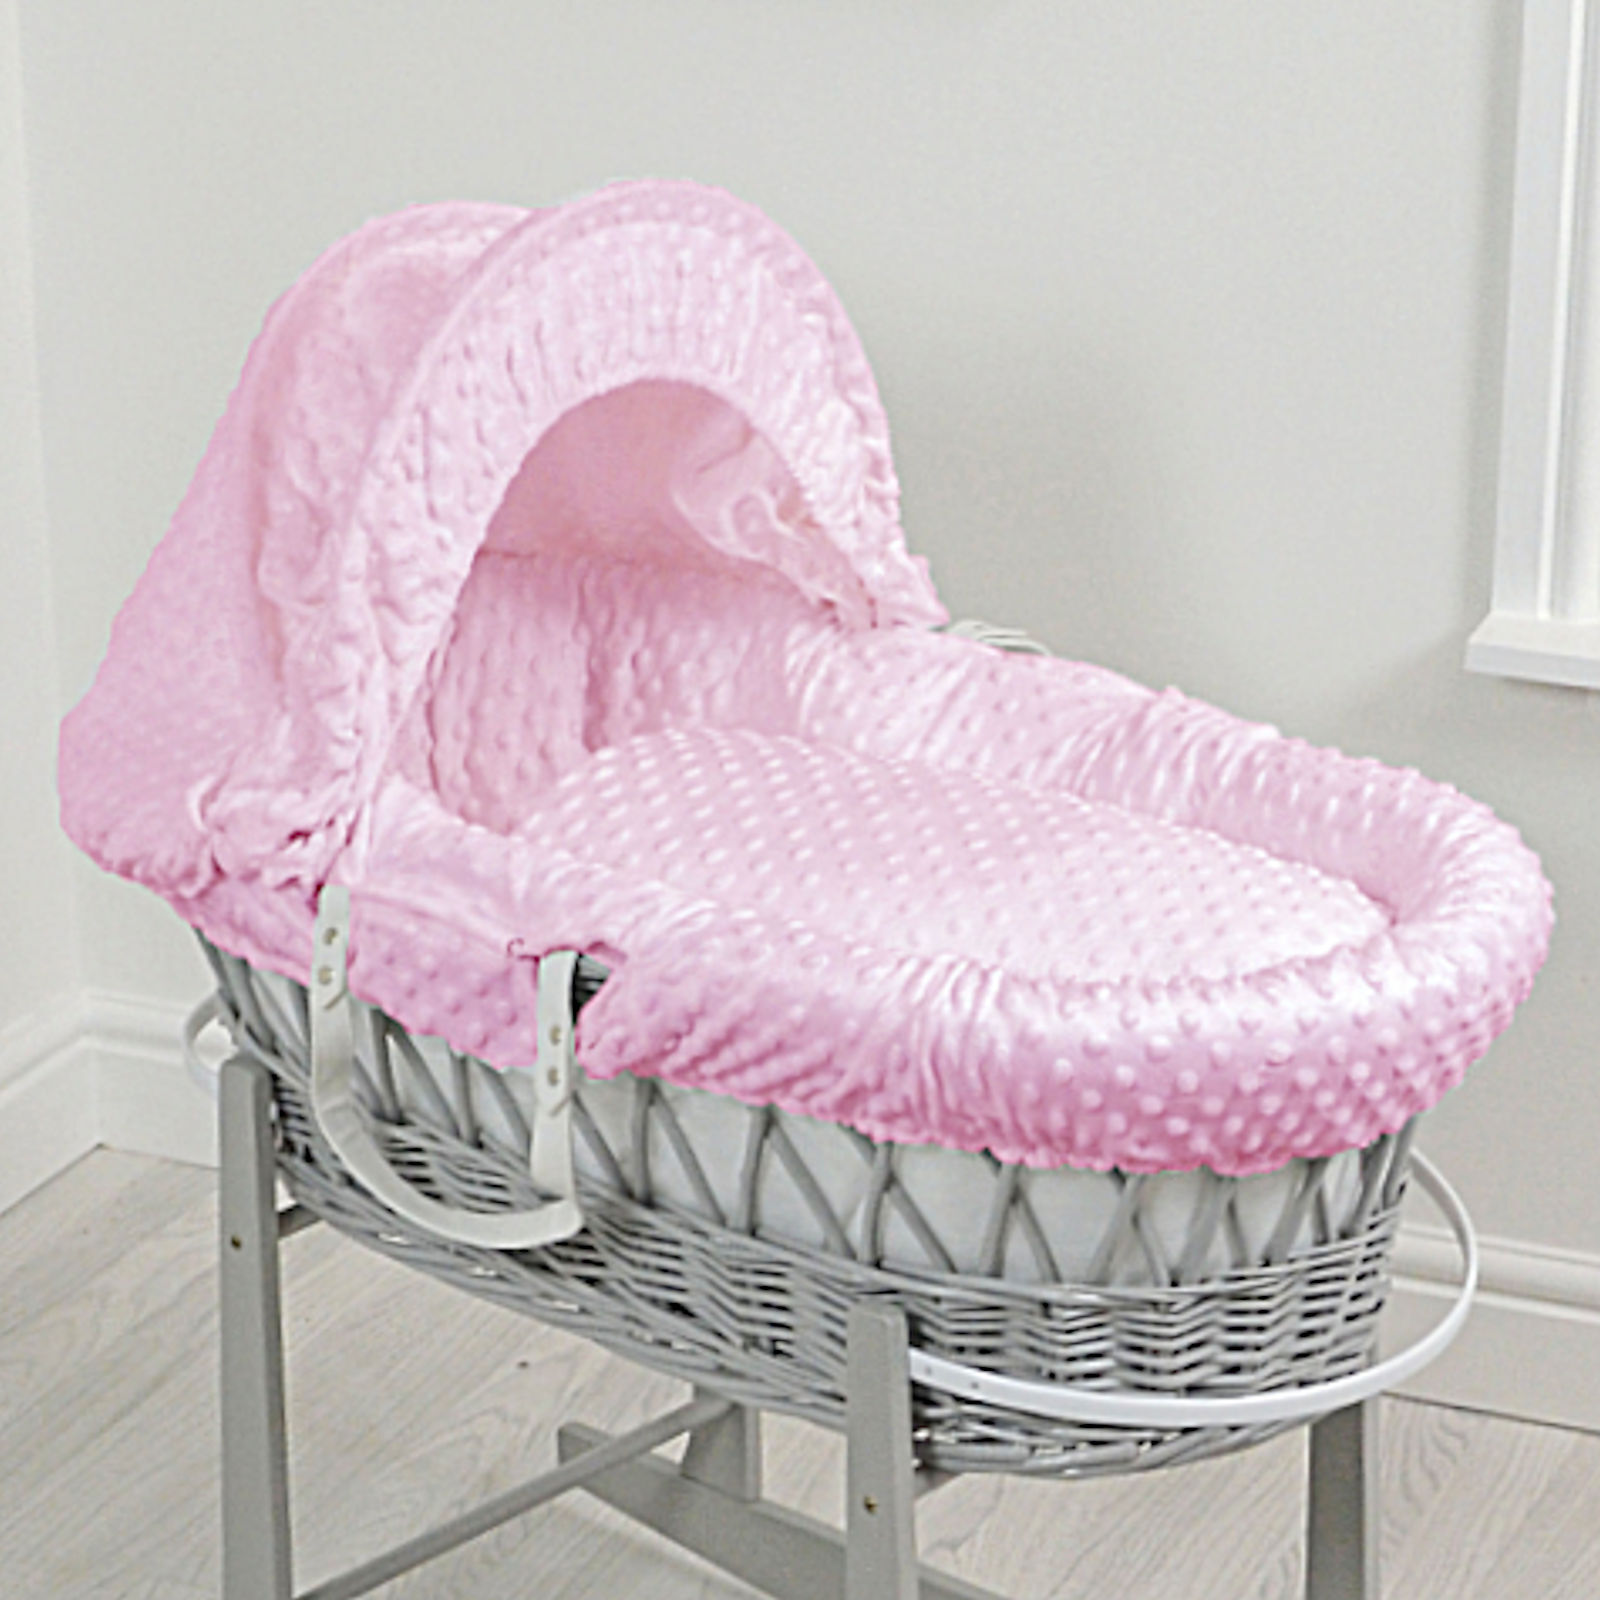 4 baby 4baby Deluxe Padded Grey Wicker Moses Basket - Pink Dimple